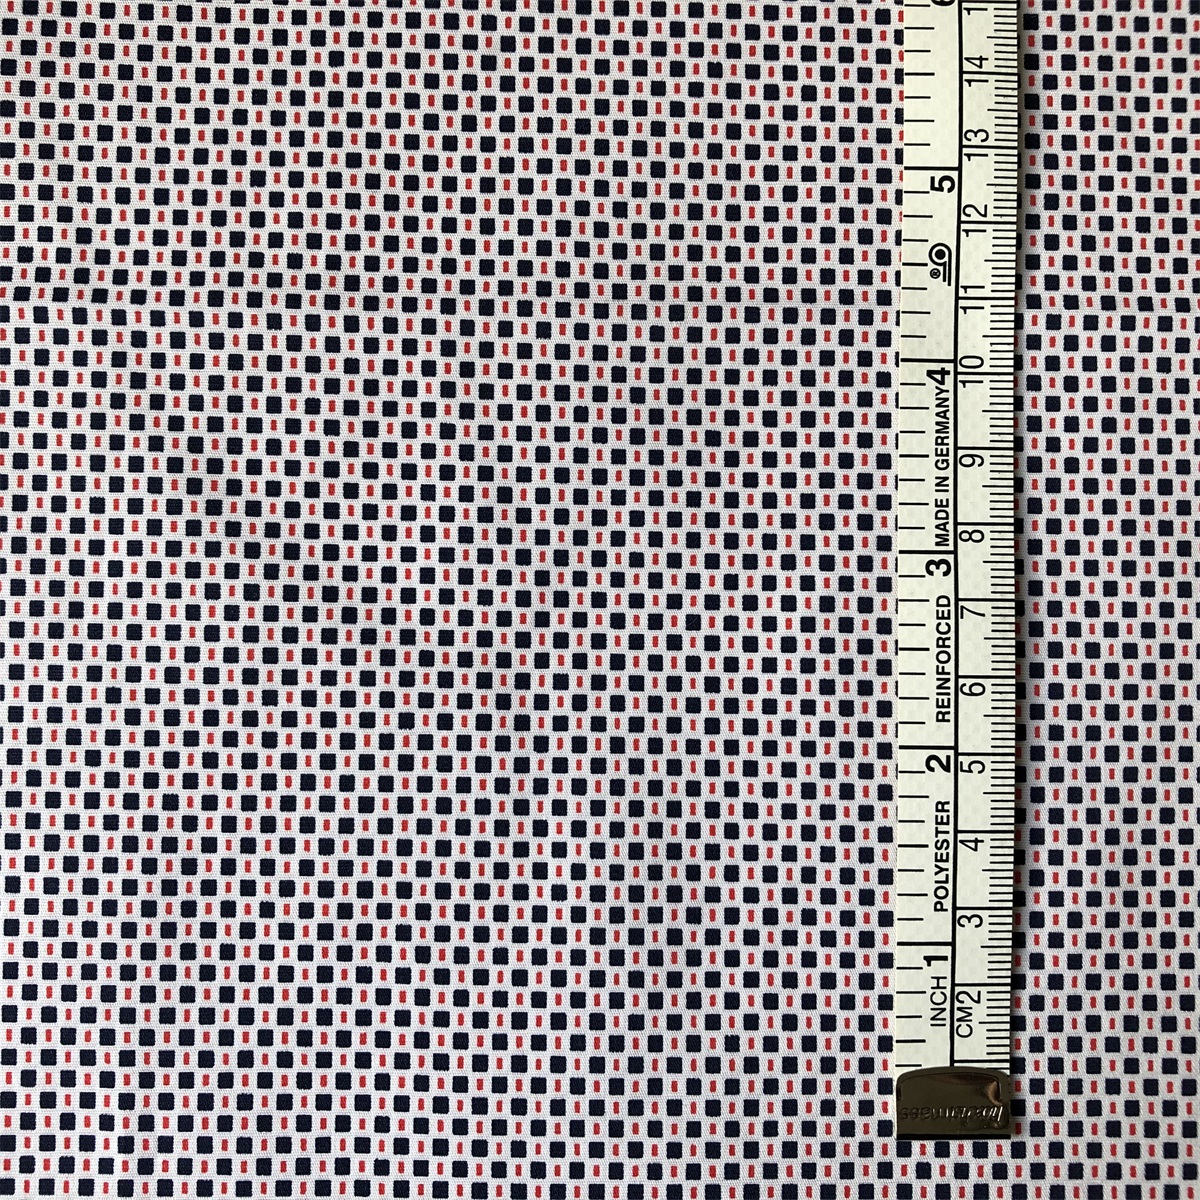 Soft comfortable Spandex Fabric by compact yarn 98% cotton 2% spandex poplin printed shirts woven stretchy fabric